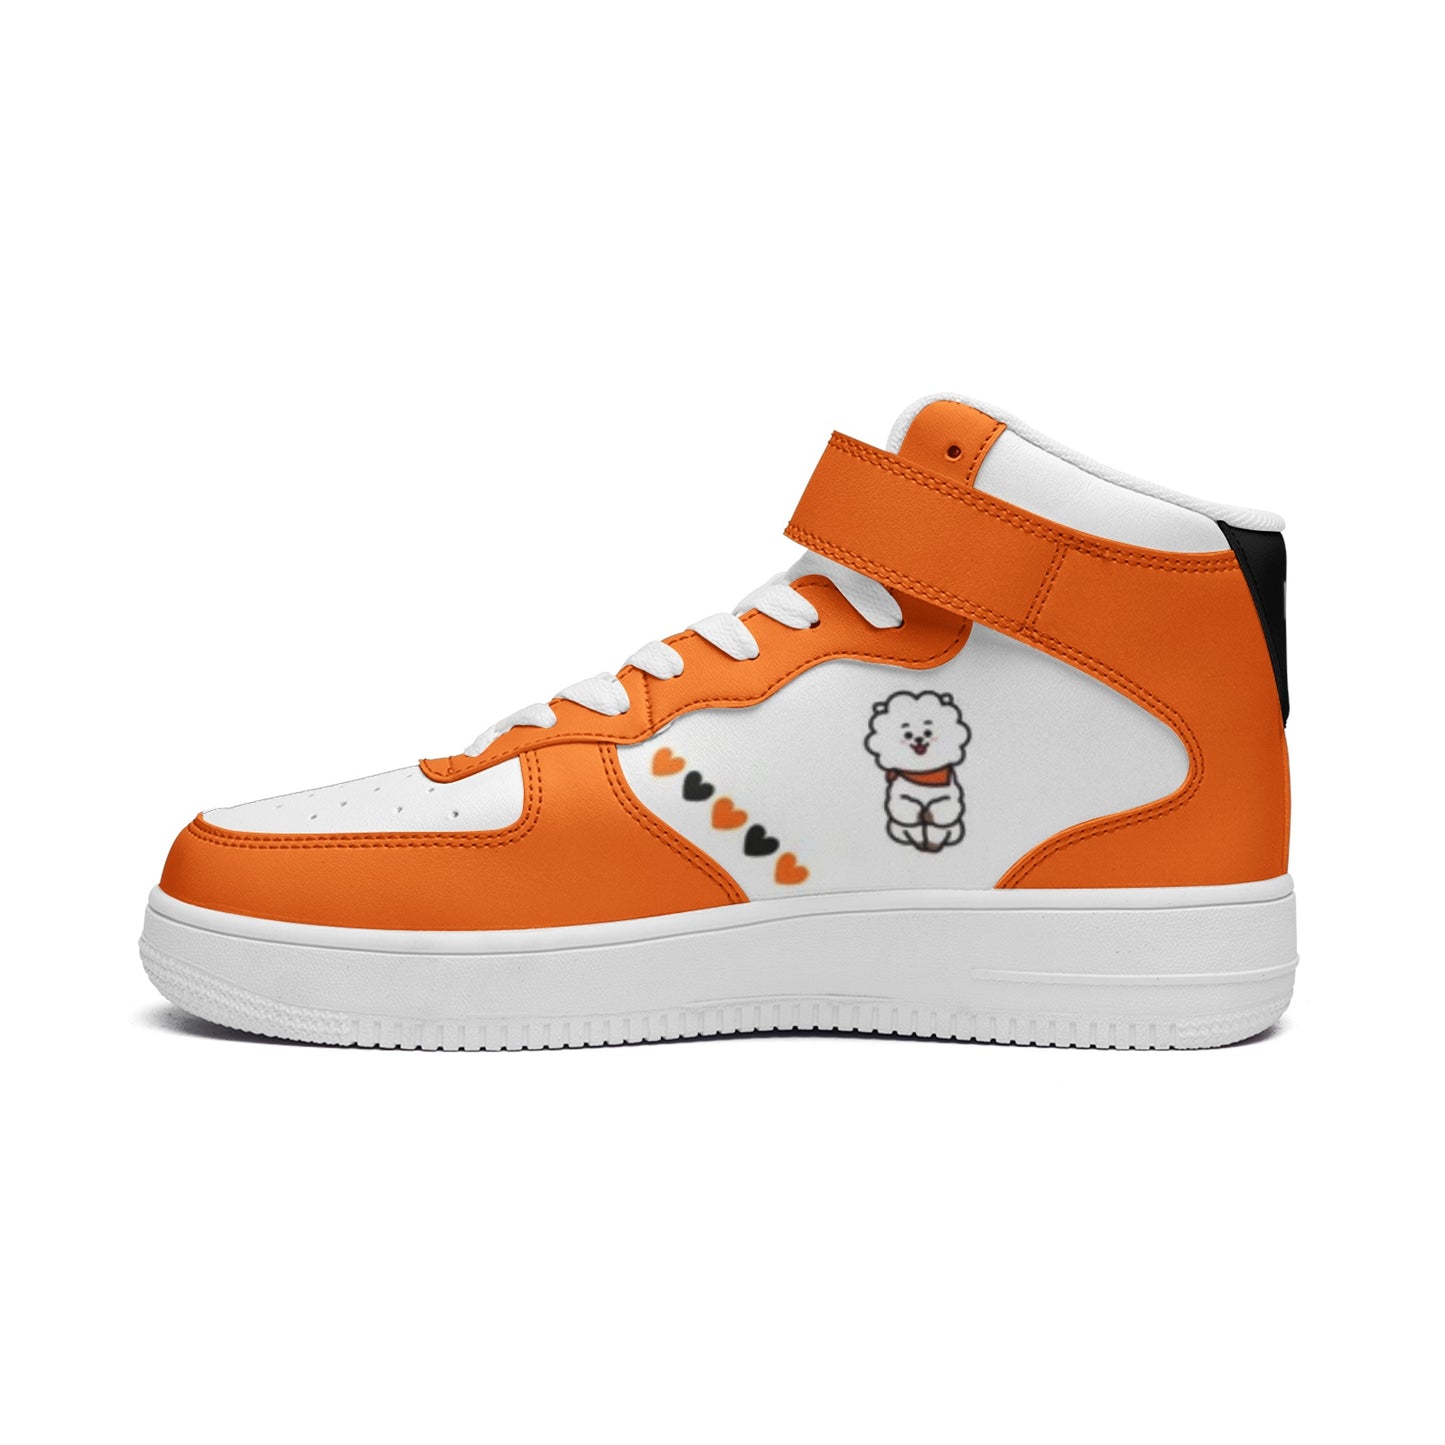 BT21 RJ Unisex high Top Leather Sneakers